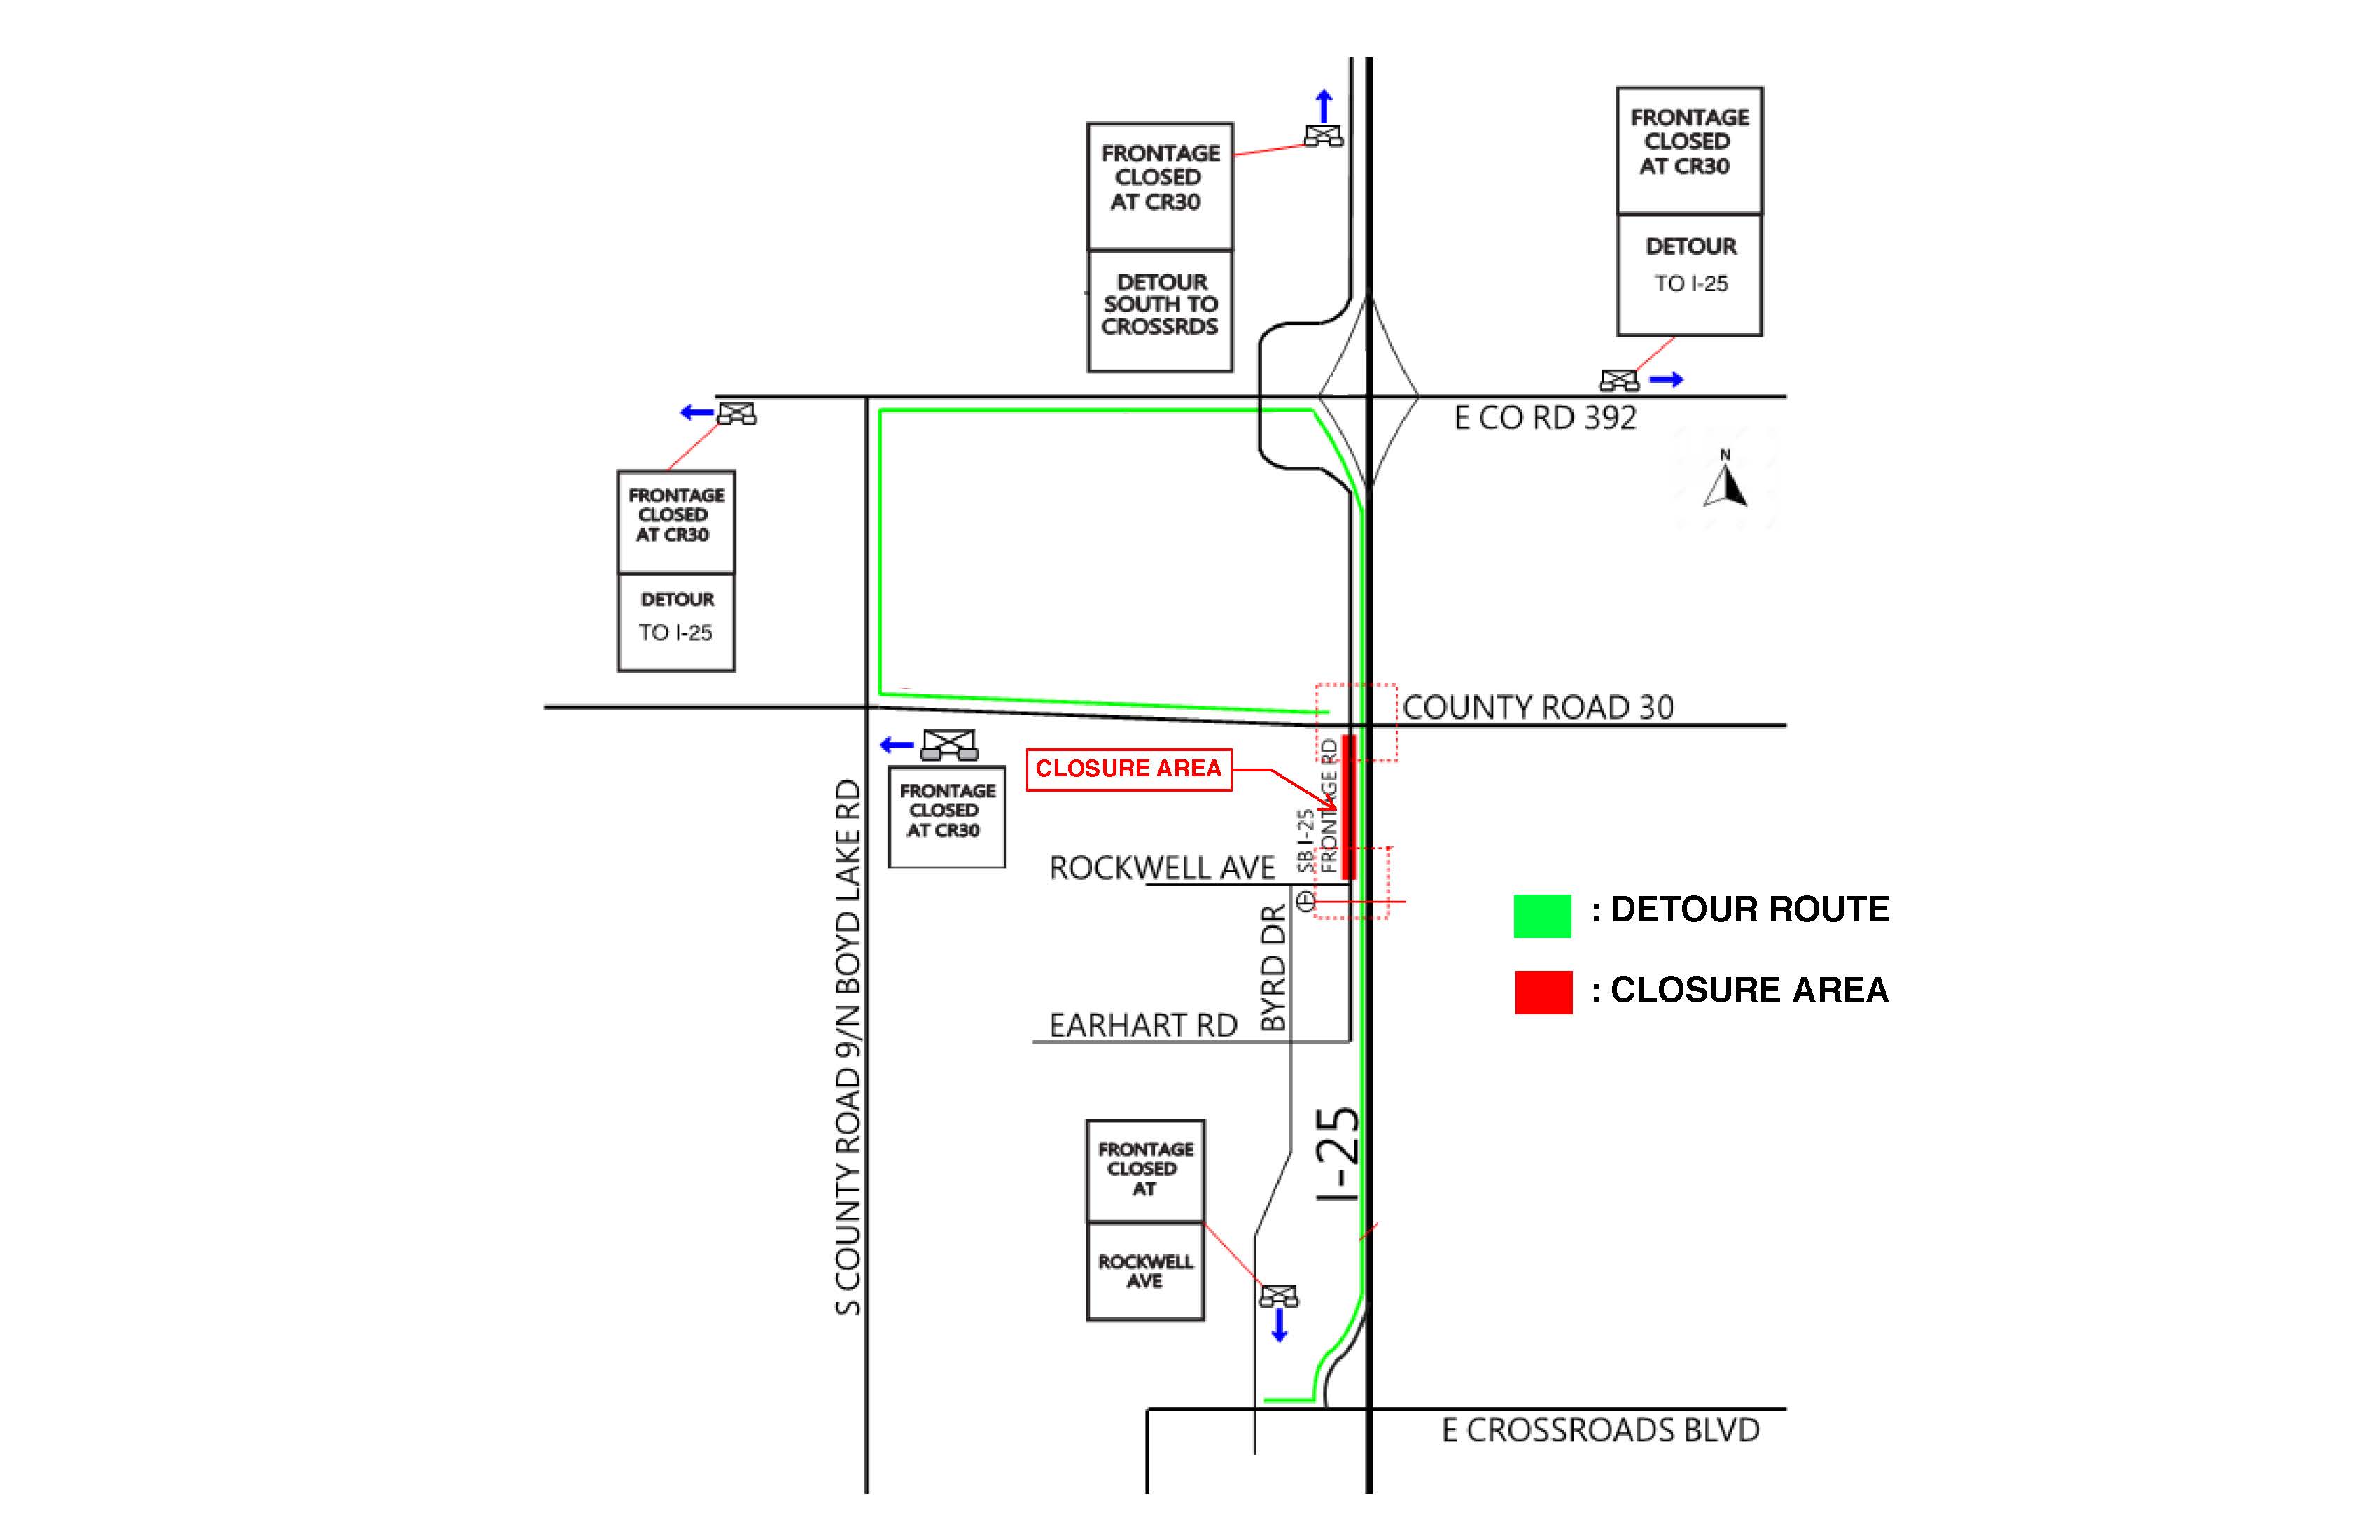 Upcoming closure of the SW Frontage Road from E County Rd 30 to Rockwell Ave Map.jpg detail image